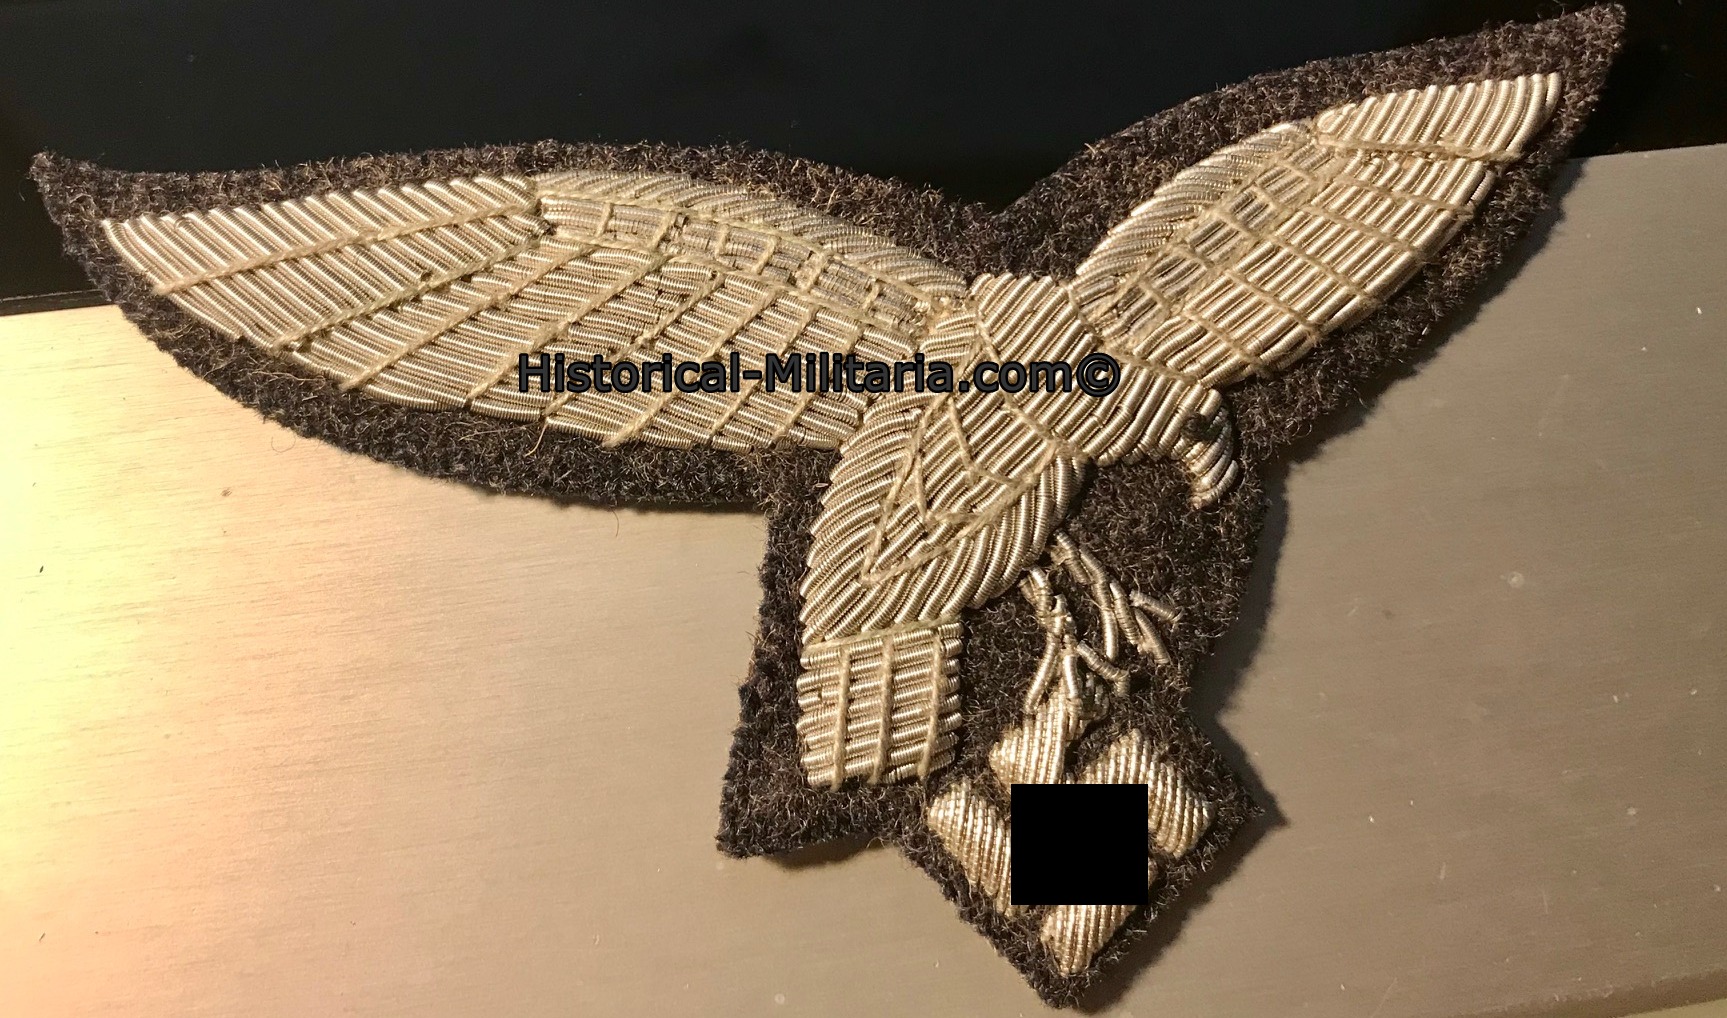 Luftwaffe Officer breast eagle droop tailed on grey introducted before 1934 - Luftwaffe Offizier Brust Adler 1. Modell vor 1934 - Aquila da petto Ufficiale della Luftwaffe primo modello